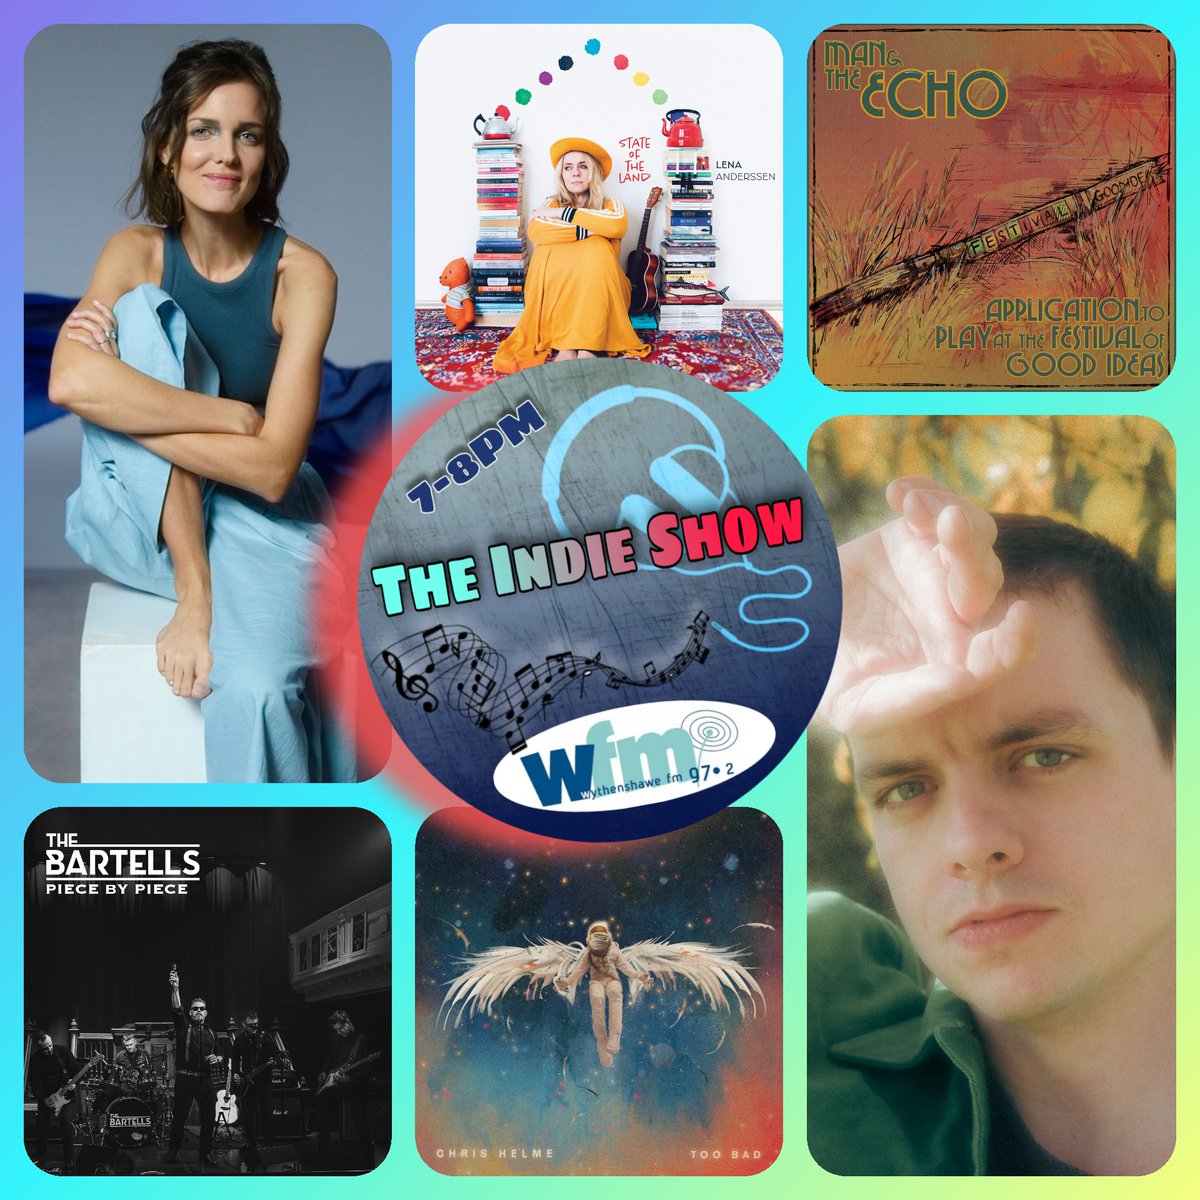 Tune in at 7⃣PM tonight for #TheIndieShow @wfm972 with music from @lenaanderssen @ManandTheEcho #RoryRyan @ChrisHelme @bartellsband @MalinAndMusic & more!! 97.2FM in South #Manchester, DAB, Smart Speaker & online: wfmradio.org ❤️🎵❤️